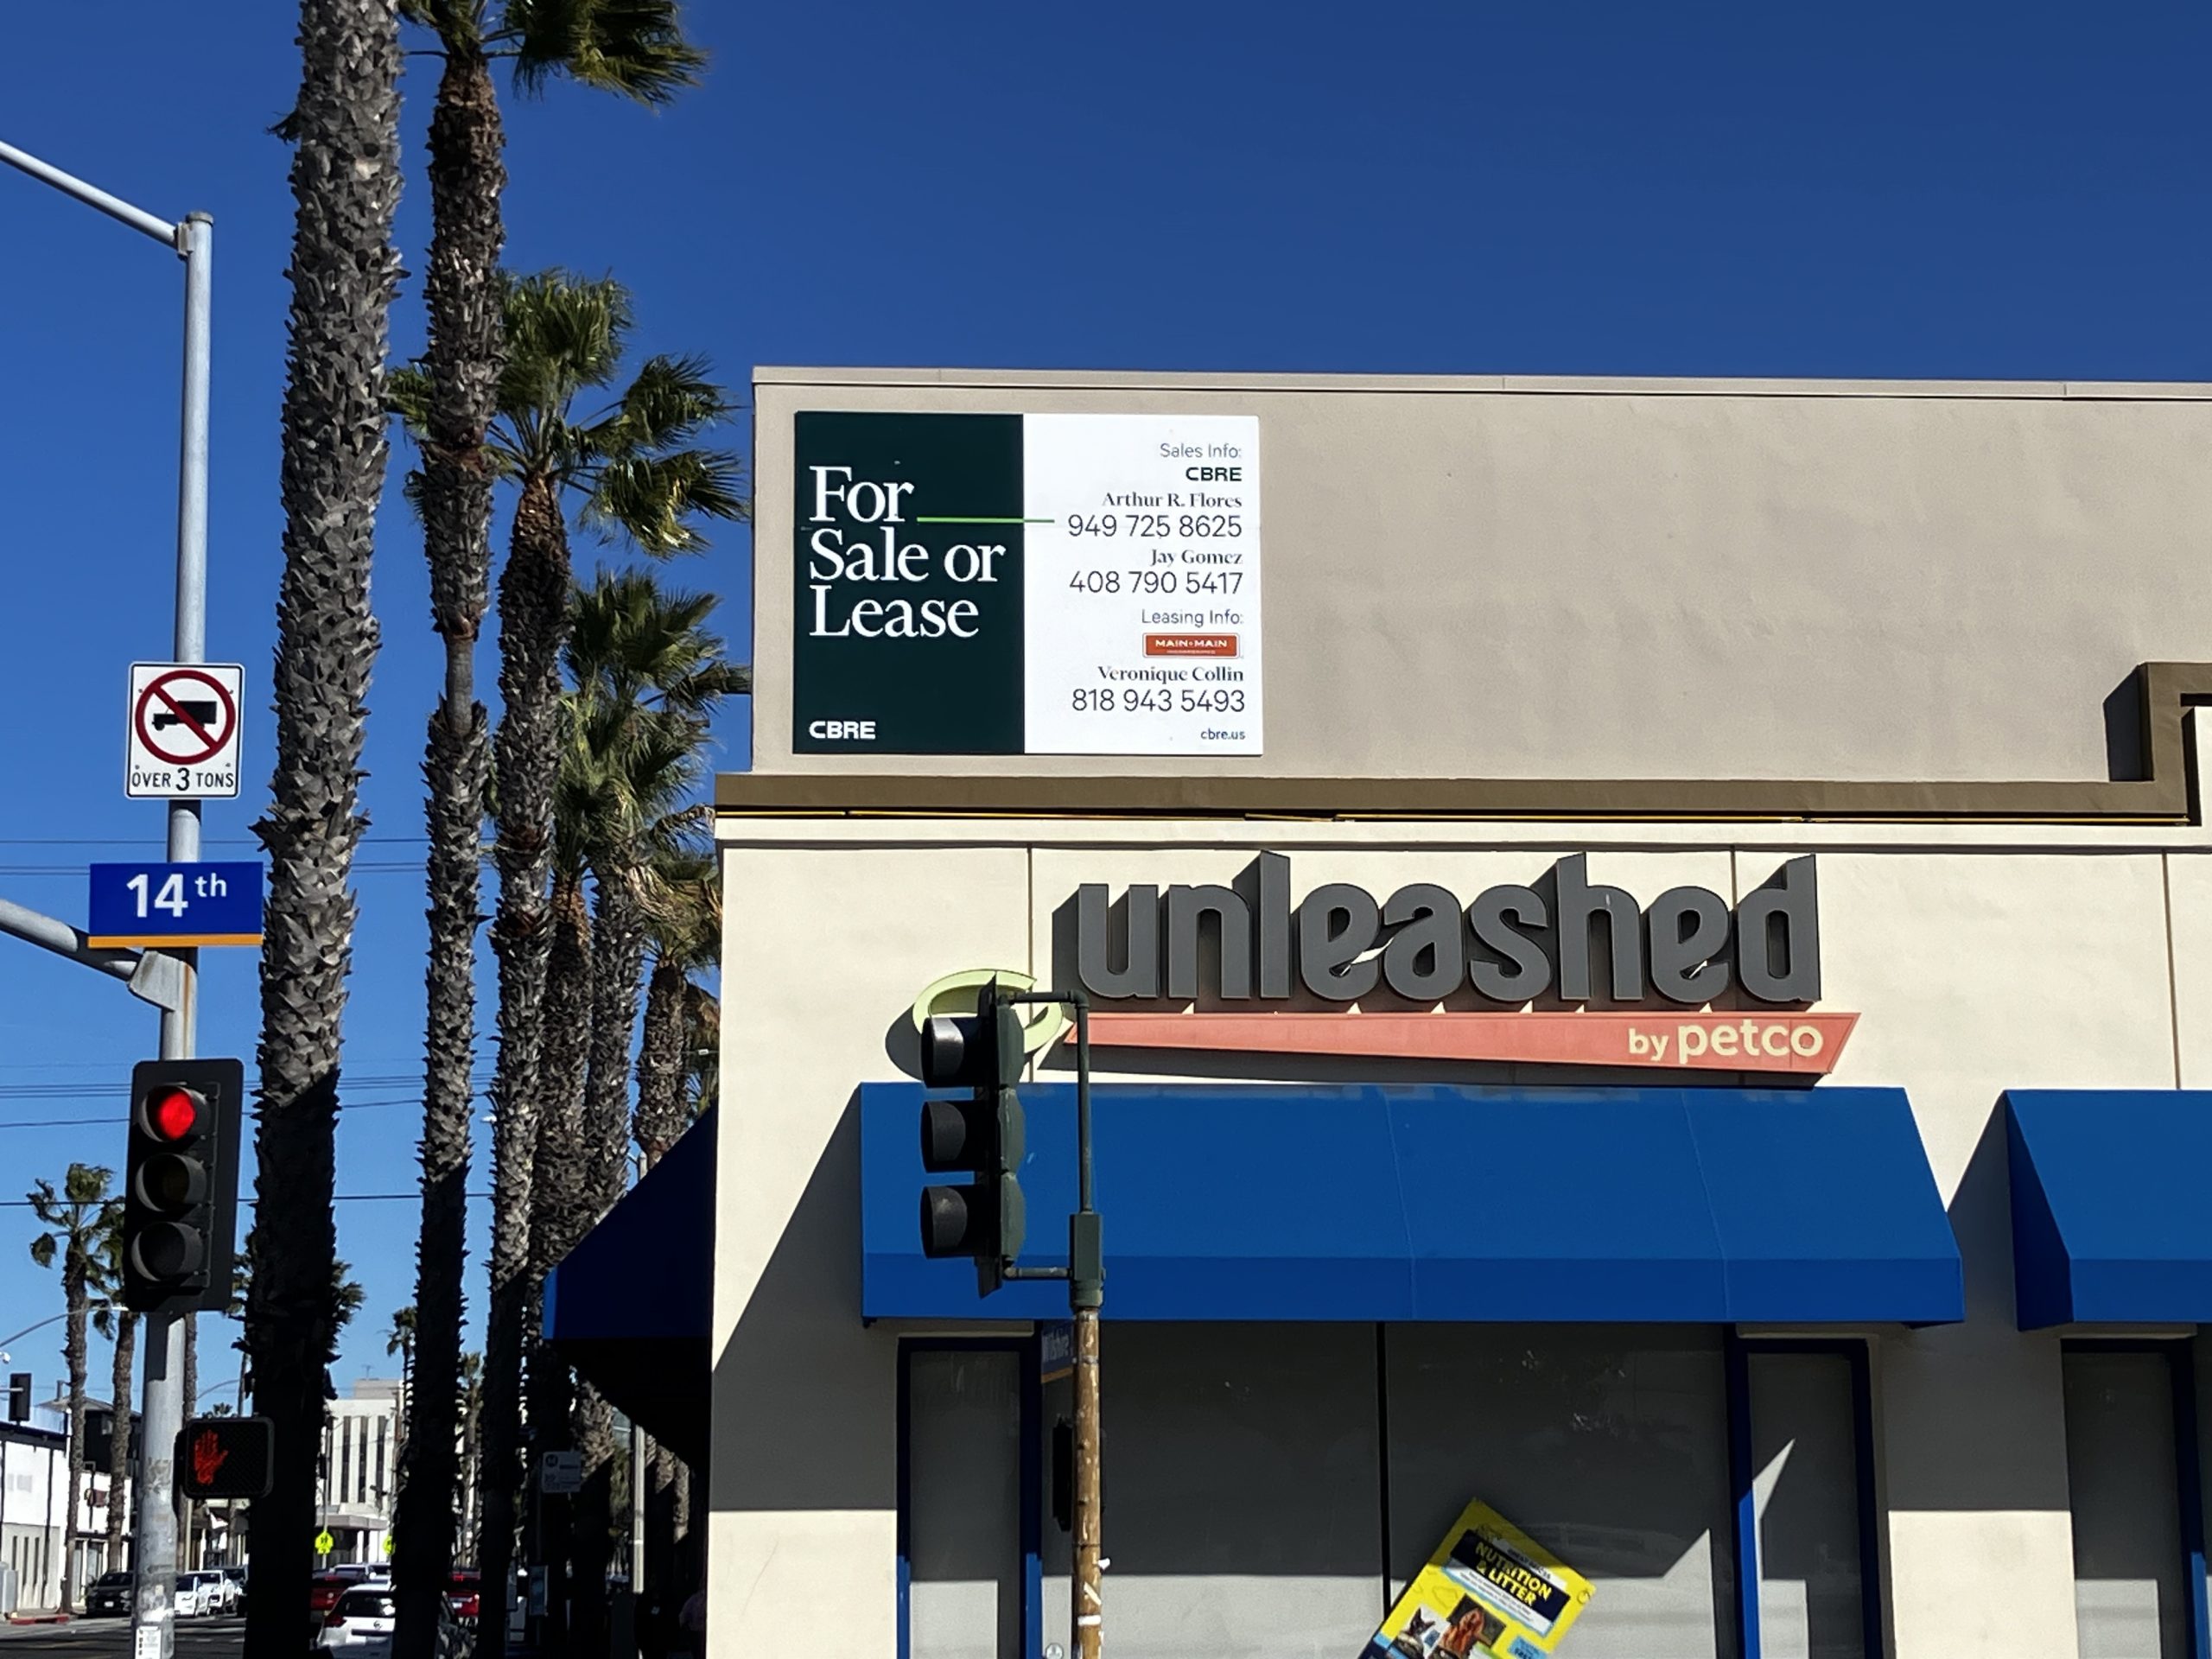 Changes coming to Wilshire’s 1400 block include the city’s second cannabis dispensary